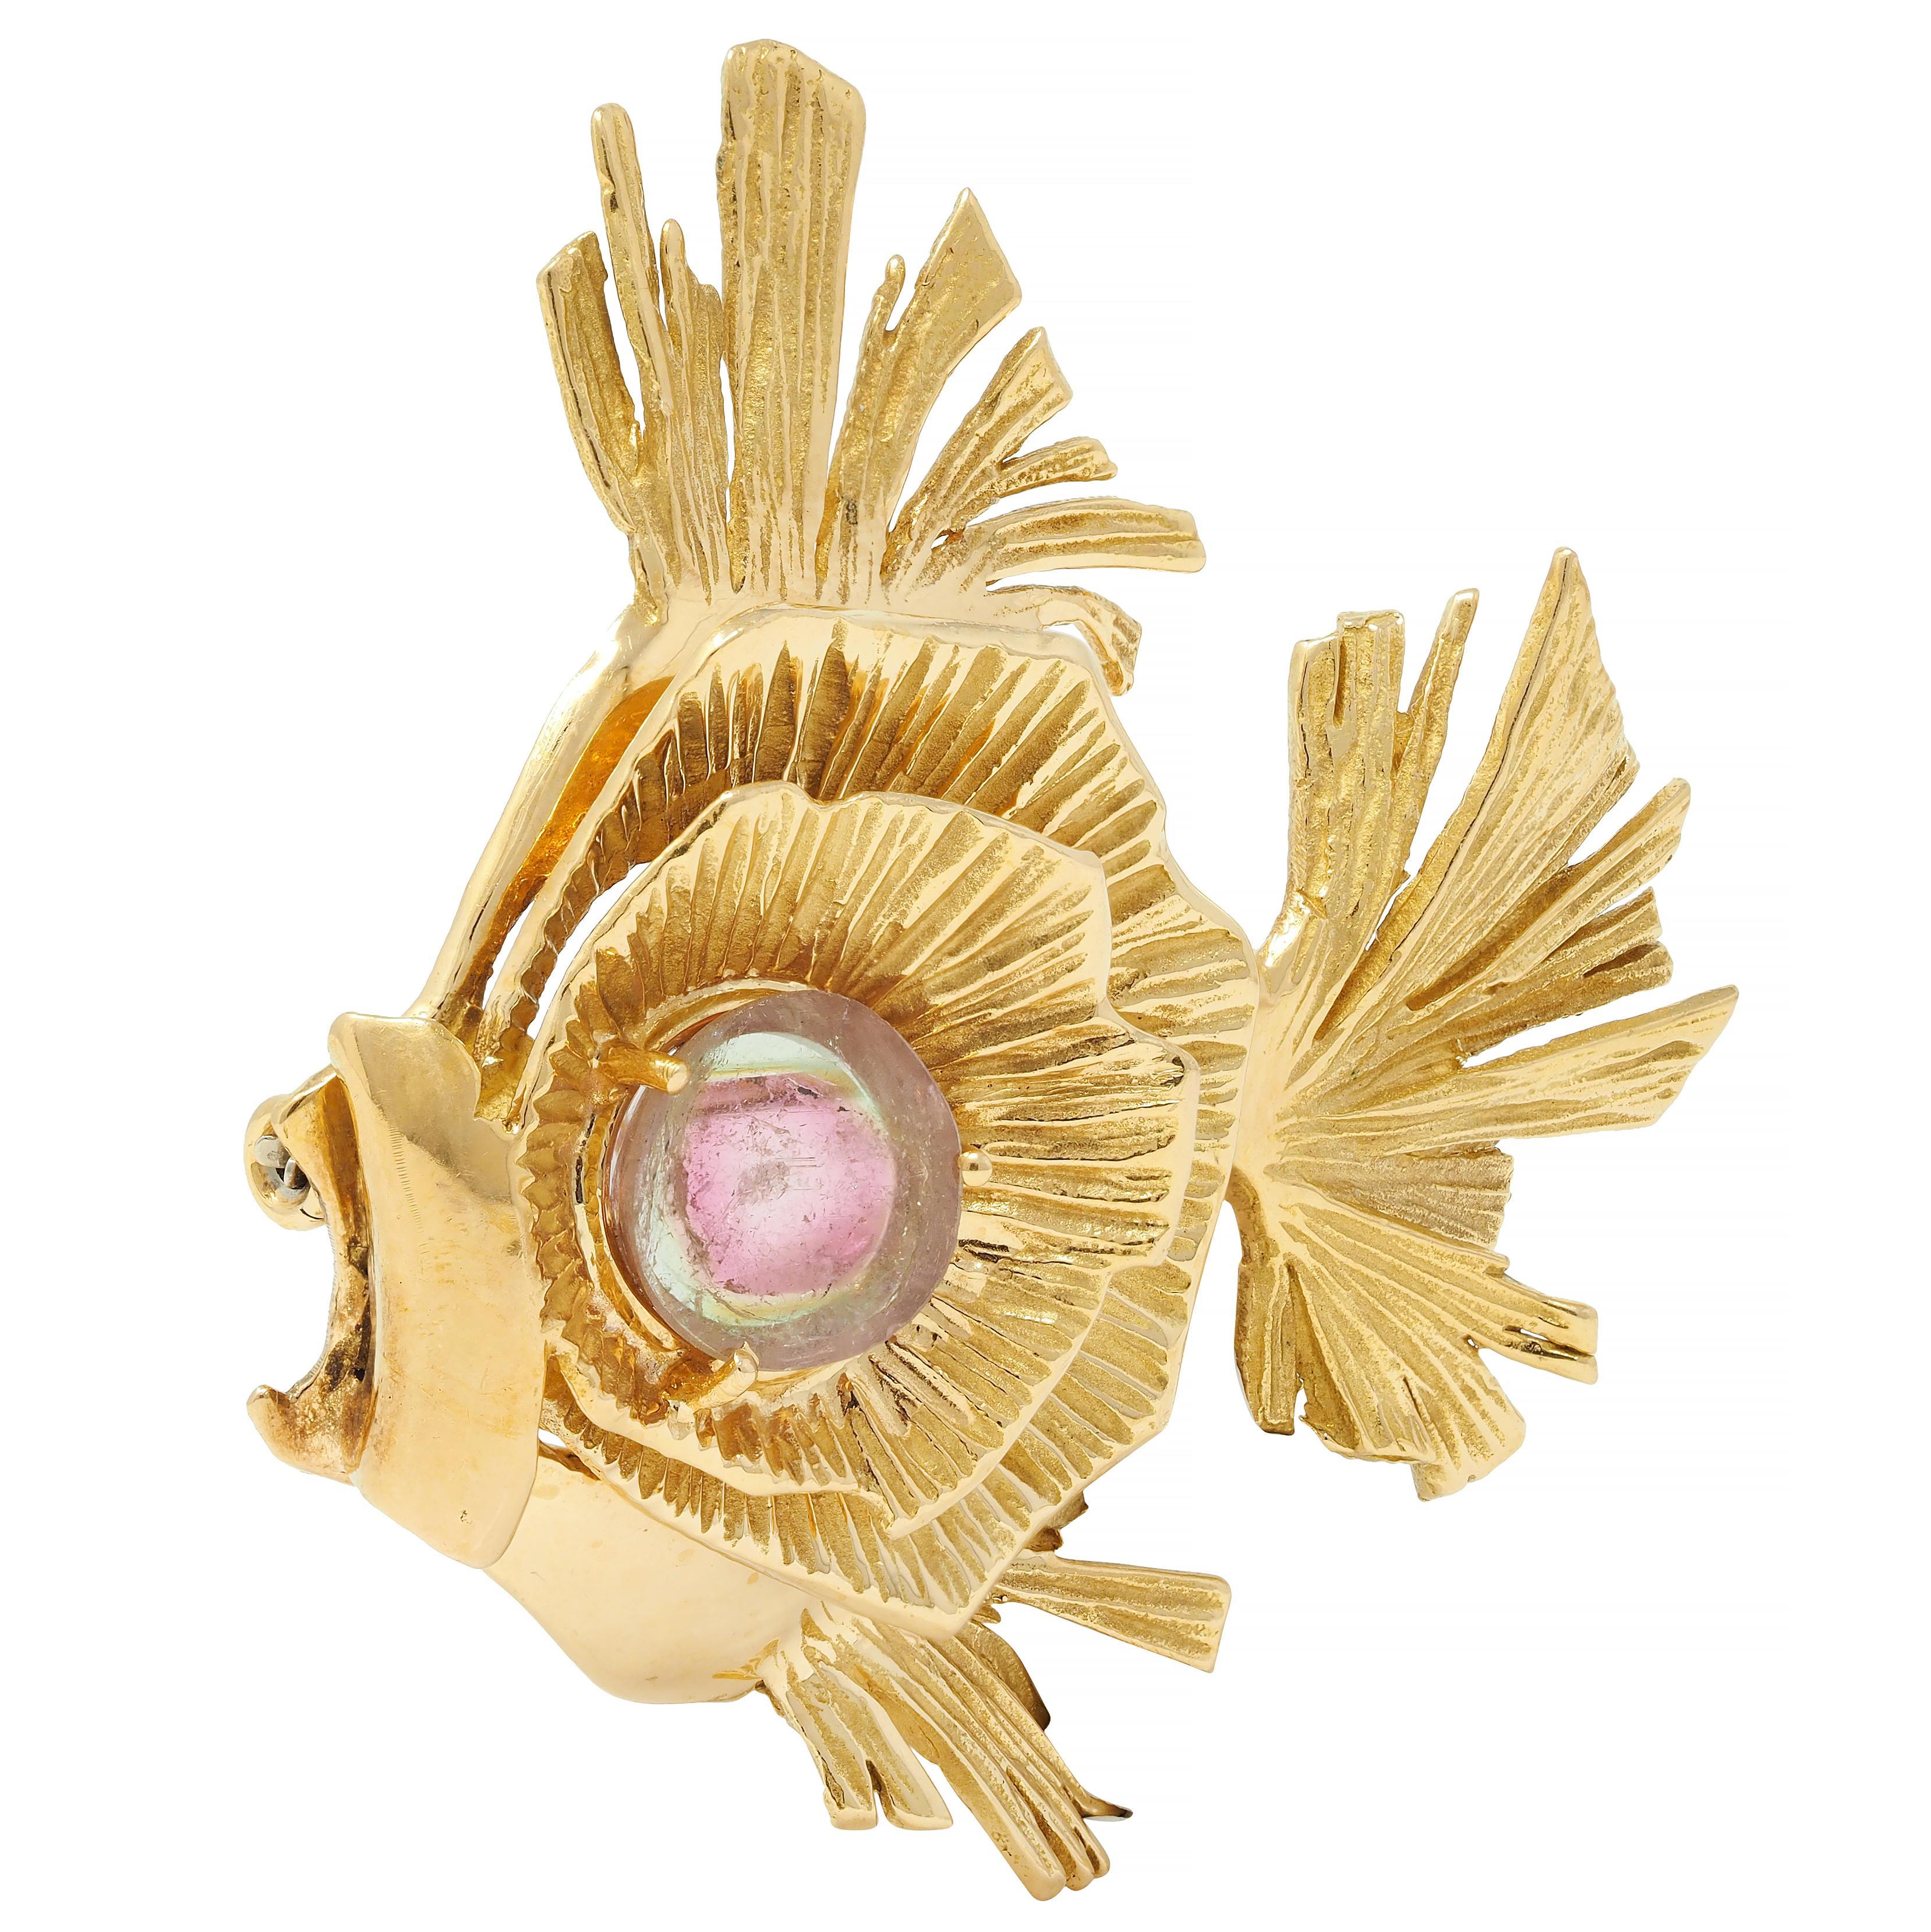 Designed as a stylized tropical fish with dimensionally pleated fins 
Featuring a 18.0 mm round tablet of watermelon tourmaline
Transparent colorless, medium pink, and light green in color
Prong set as eye centered on tiered dimensional rings 
With